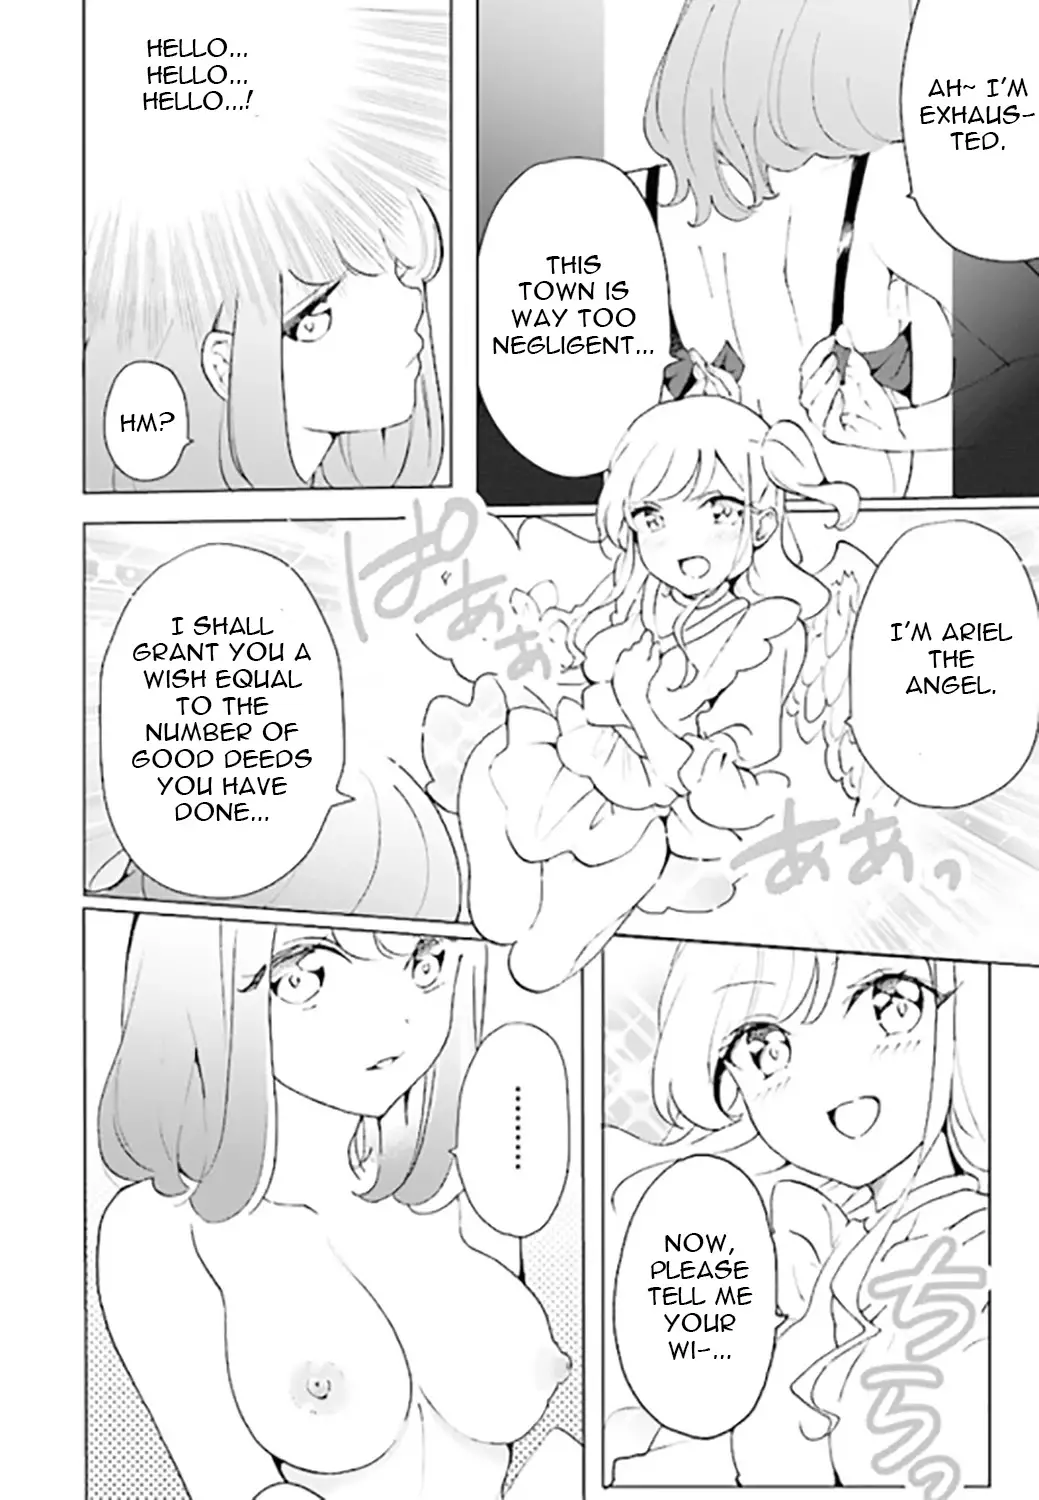 I'm An Elite Angel, But I'm Troubled By An Impregnable High School Girl - 1 page 18